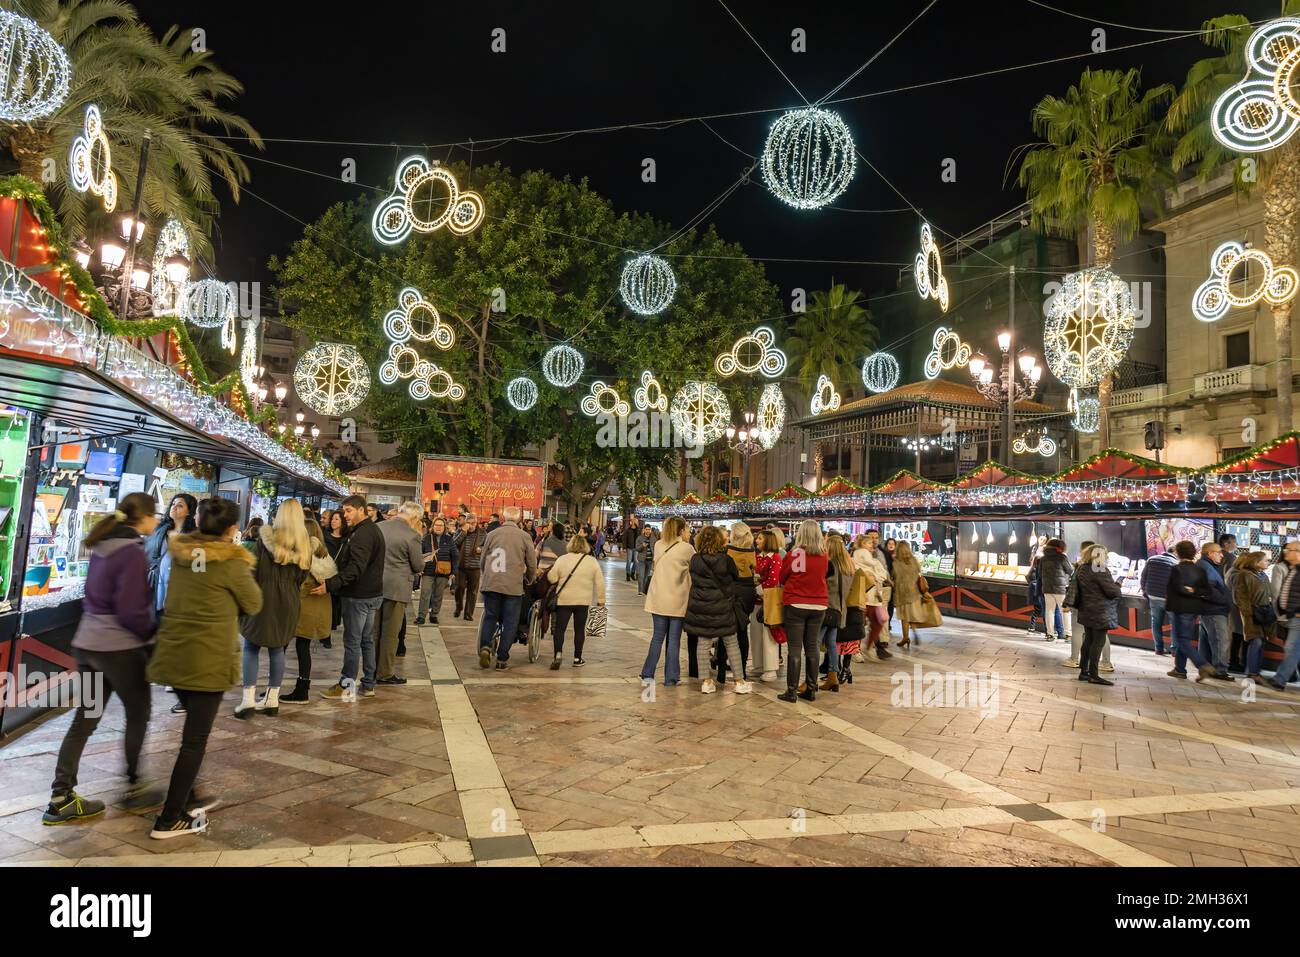 Huelva, Spain - December 27, 2022: Crowd of people visiting the the Christmas markets in the Plaza de las Monjas square, in the city center of Huelva, Stock Photo